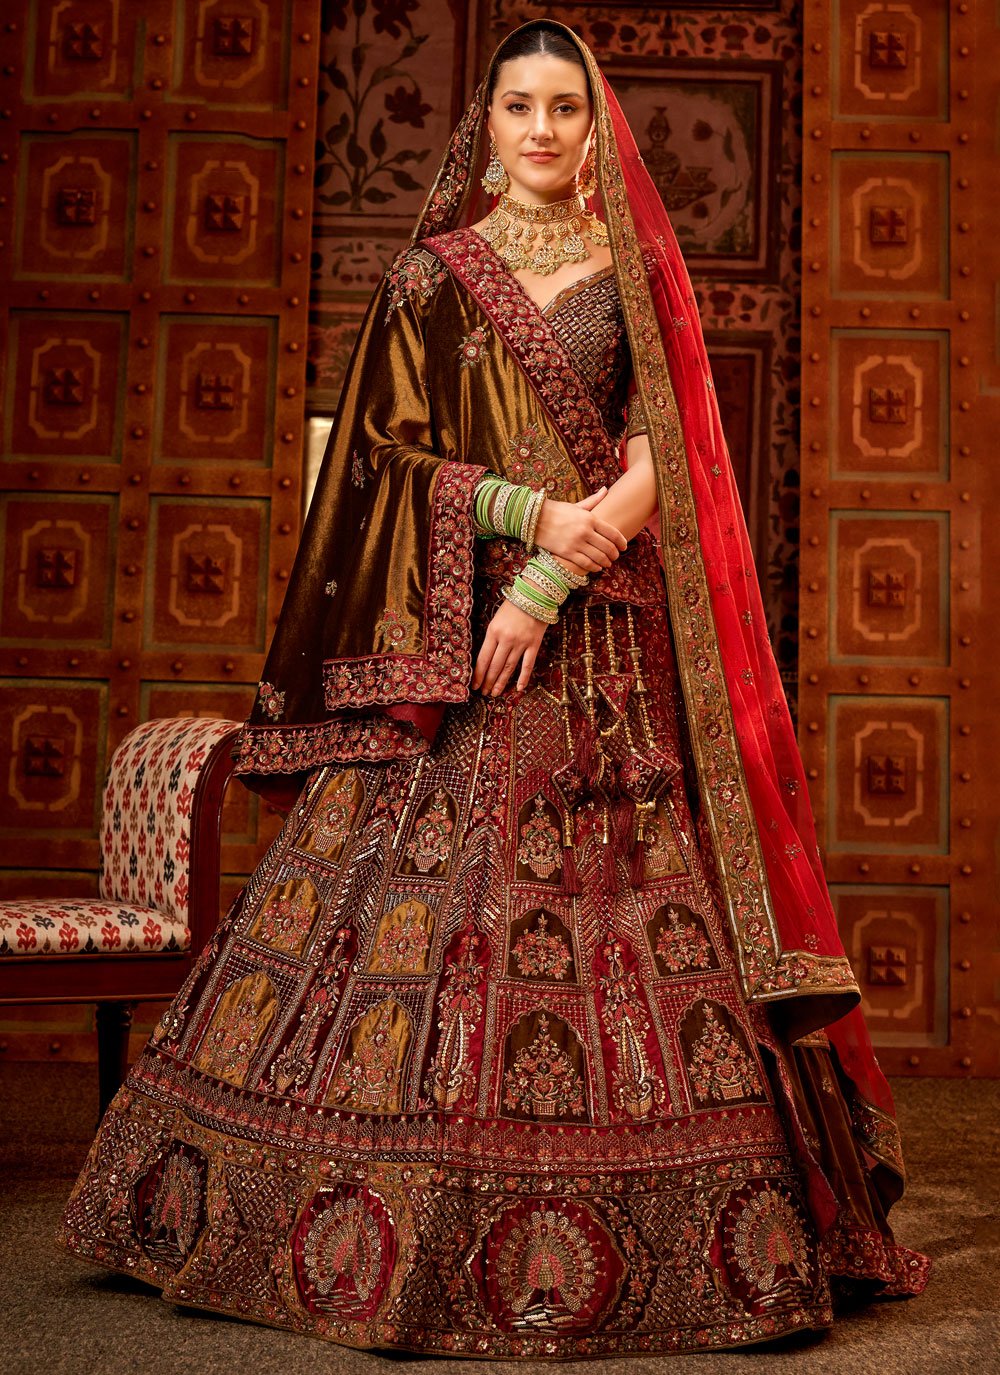 Buy Golden and maroon bridal lehenga Online @ ₹3299 from ShopClues